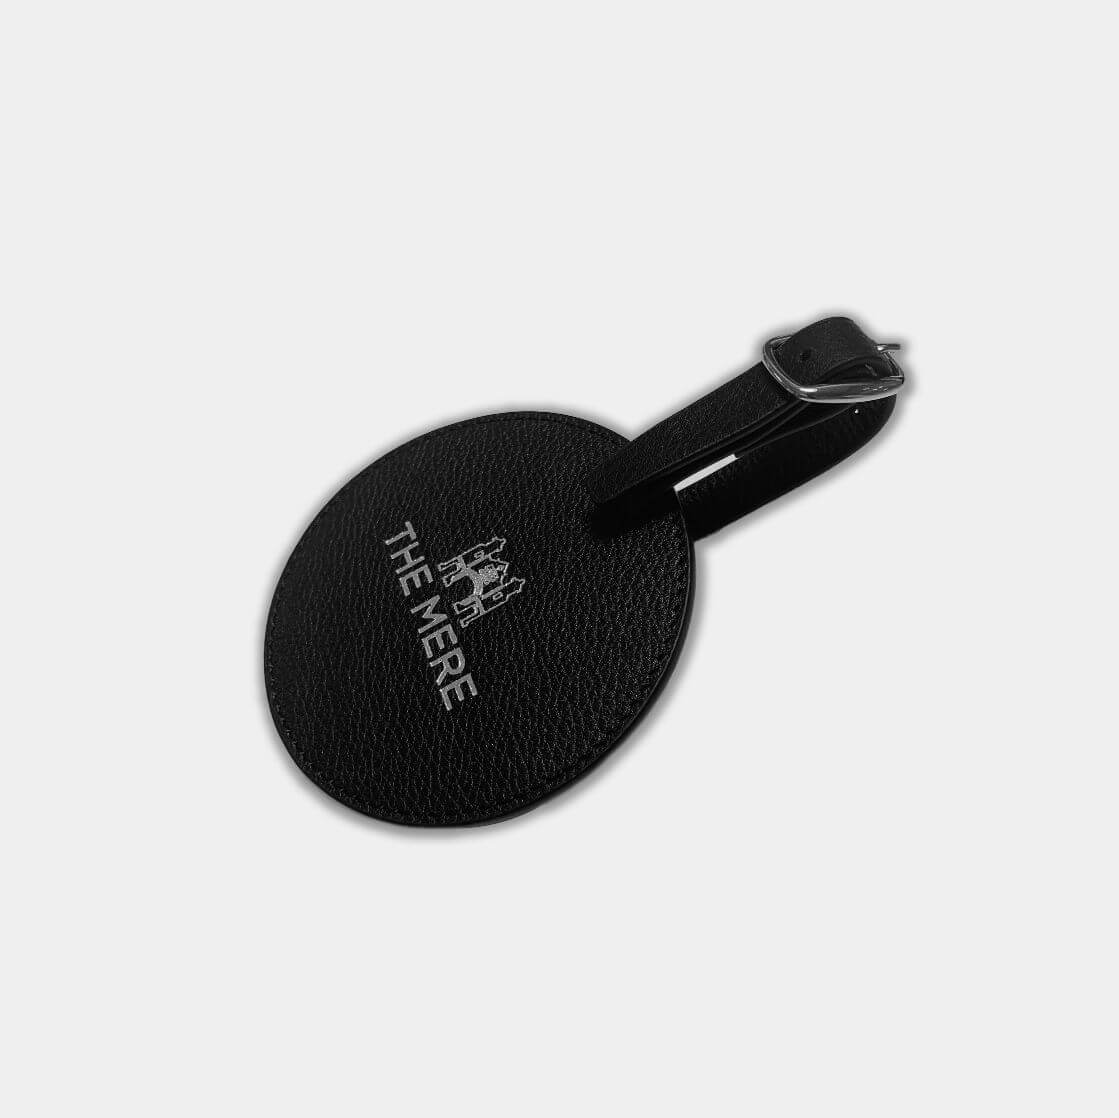 Brand your logo onto this round leather bag tag, luxury merchandise